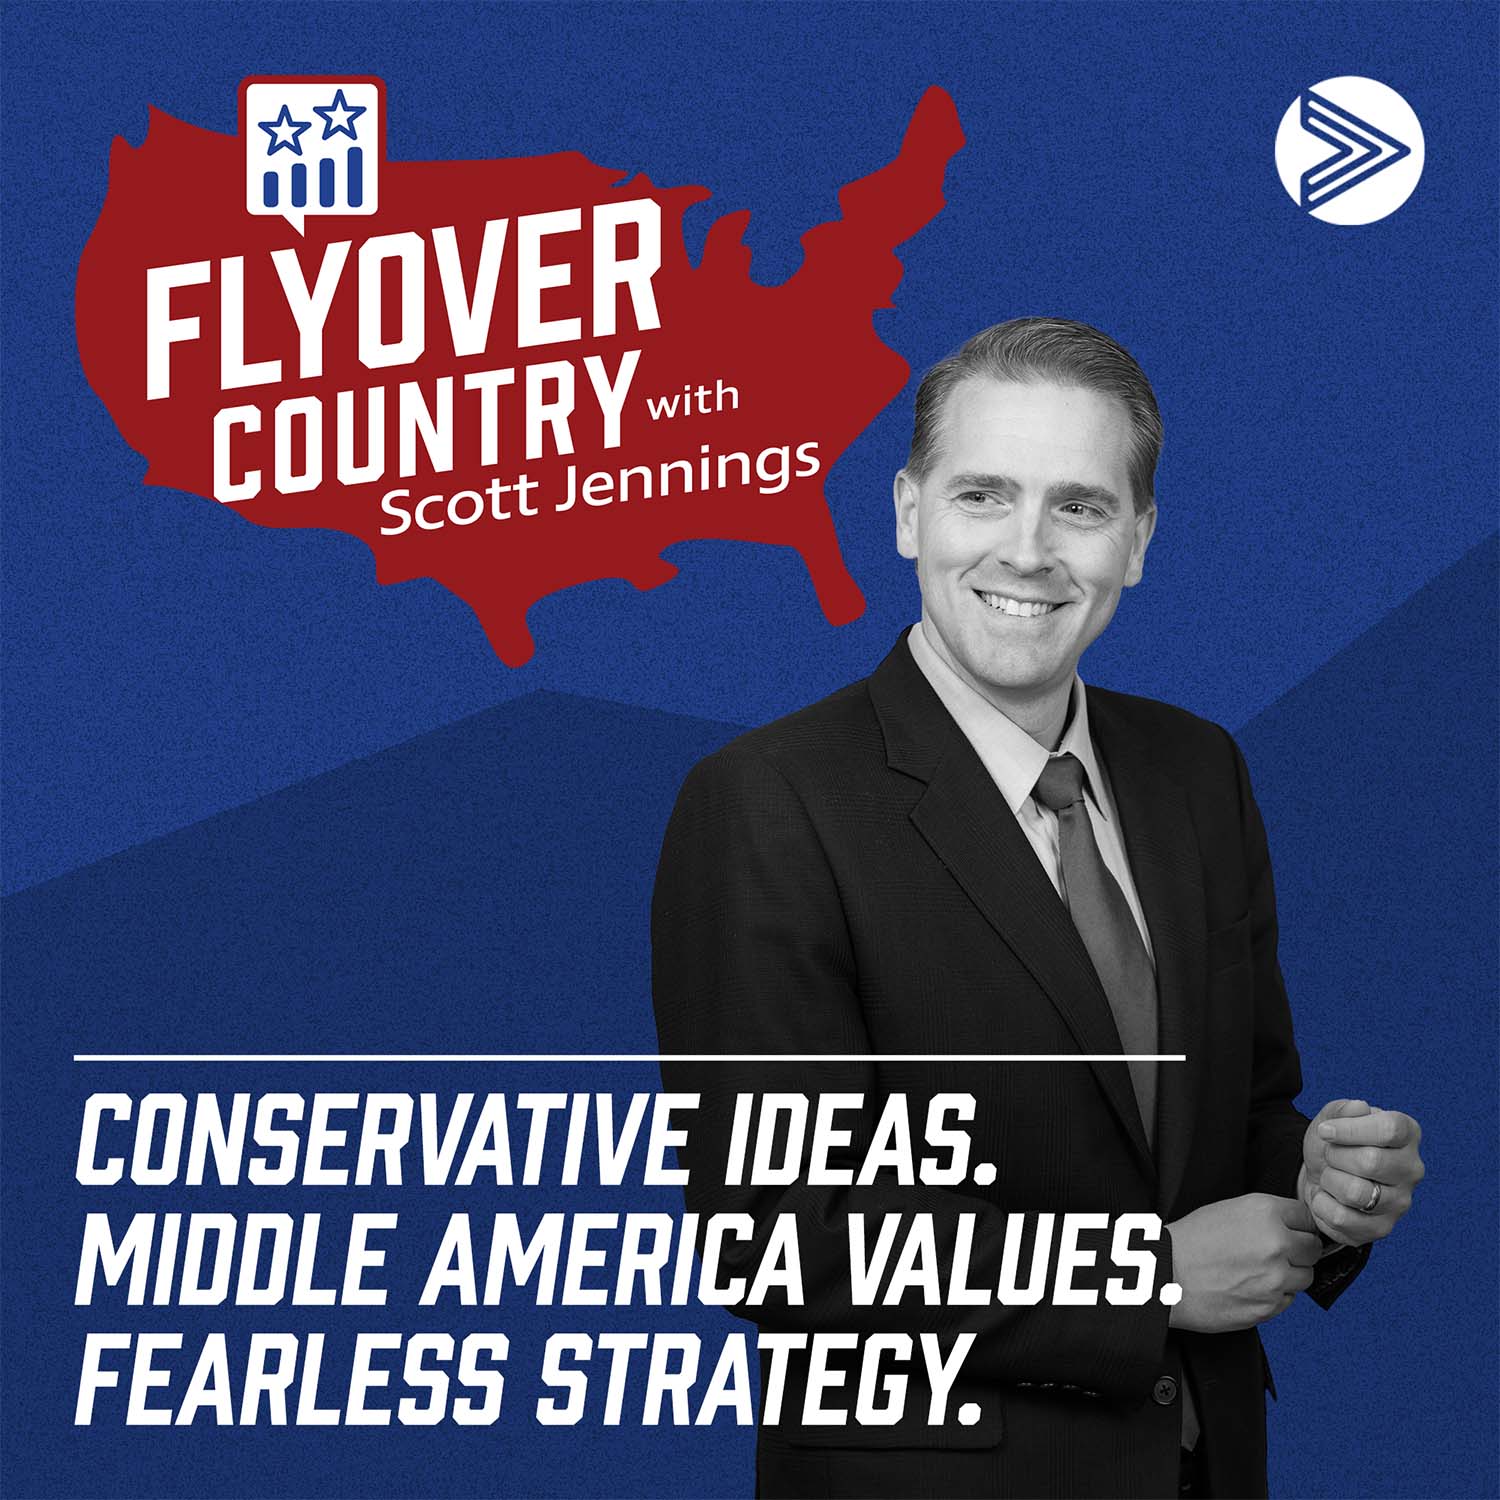 Flyover Country with Scott Jennings